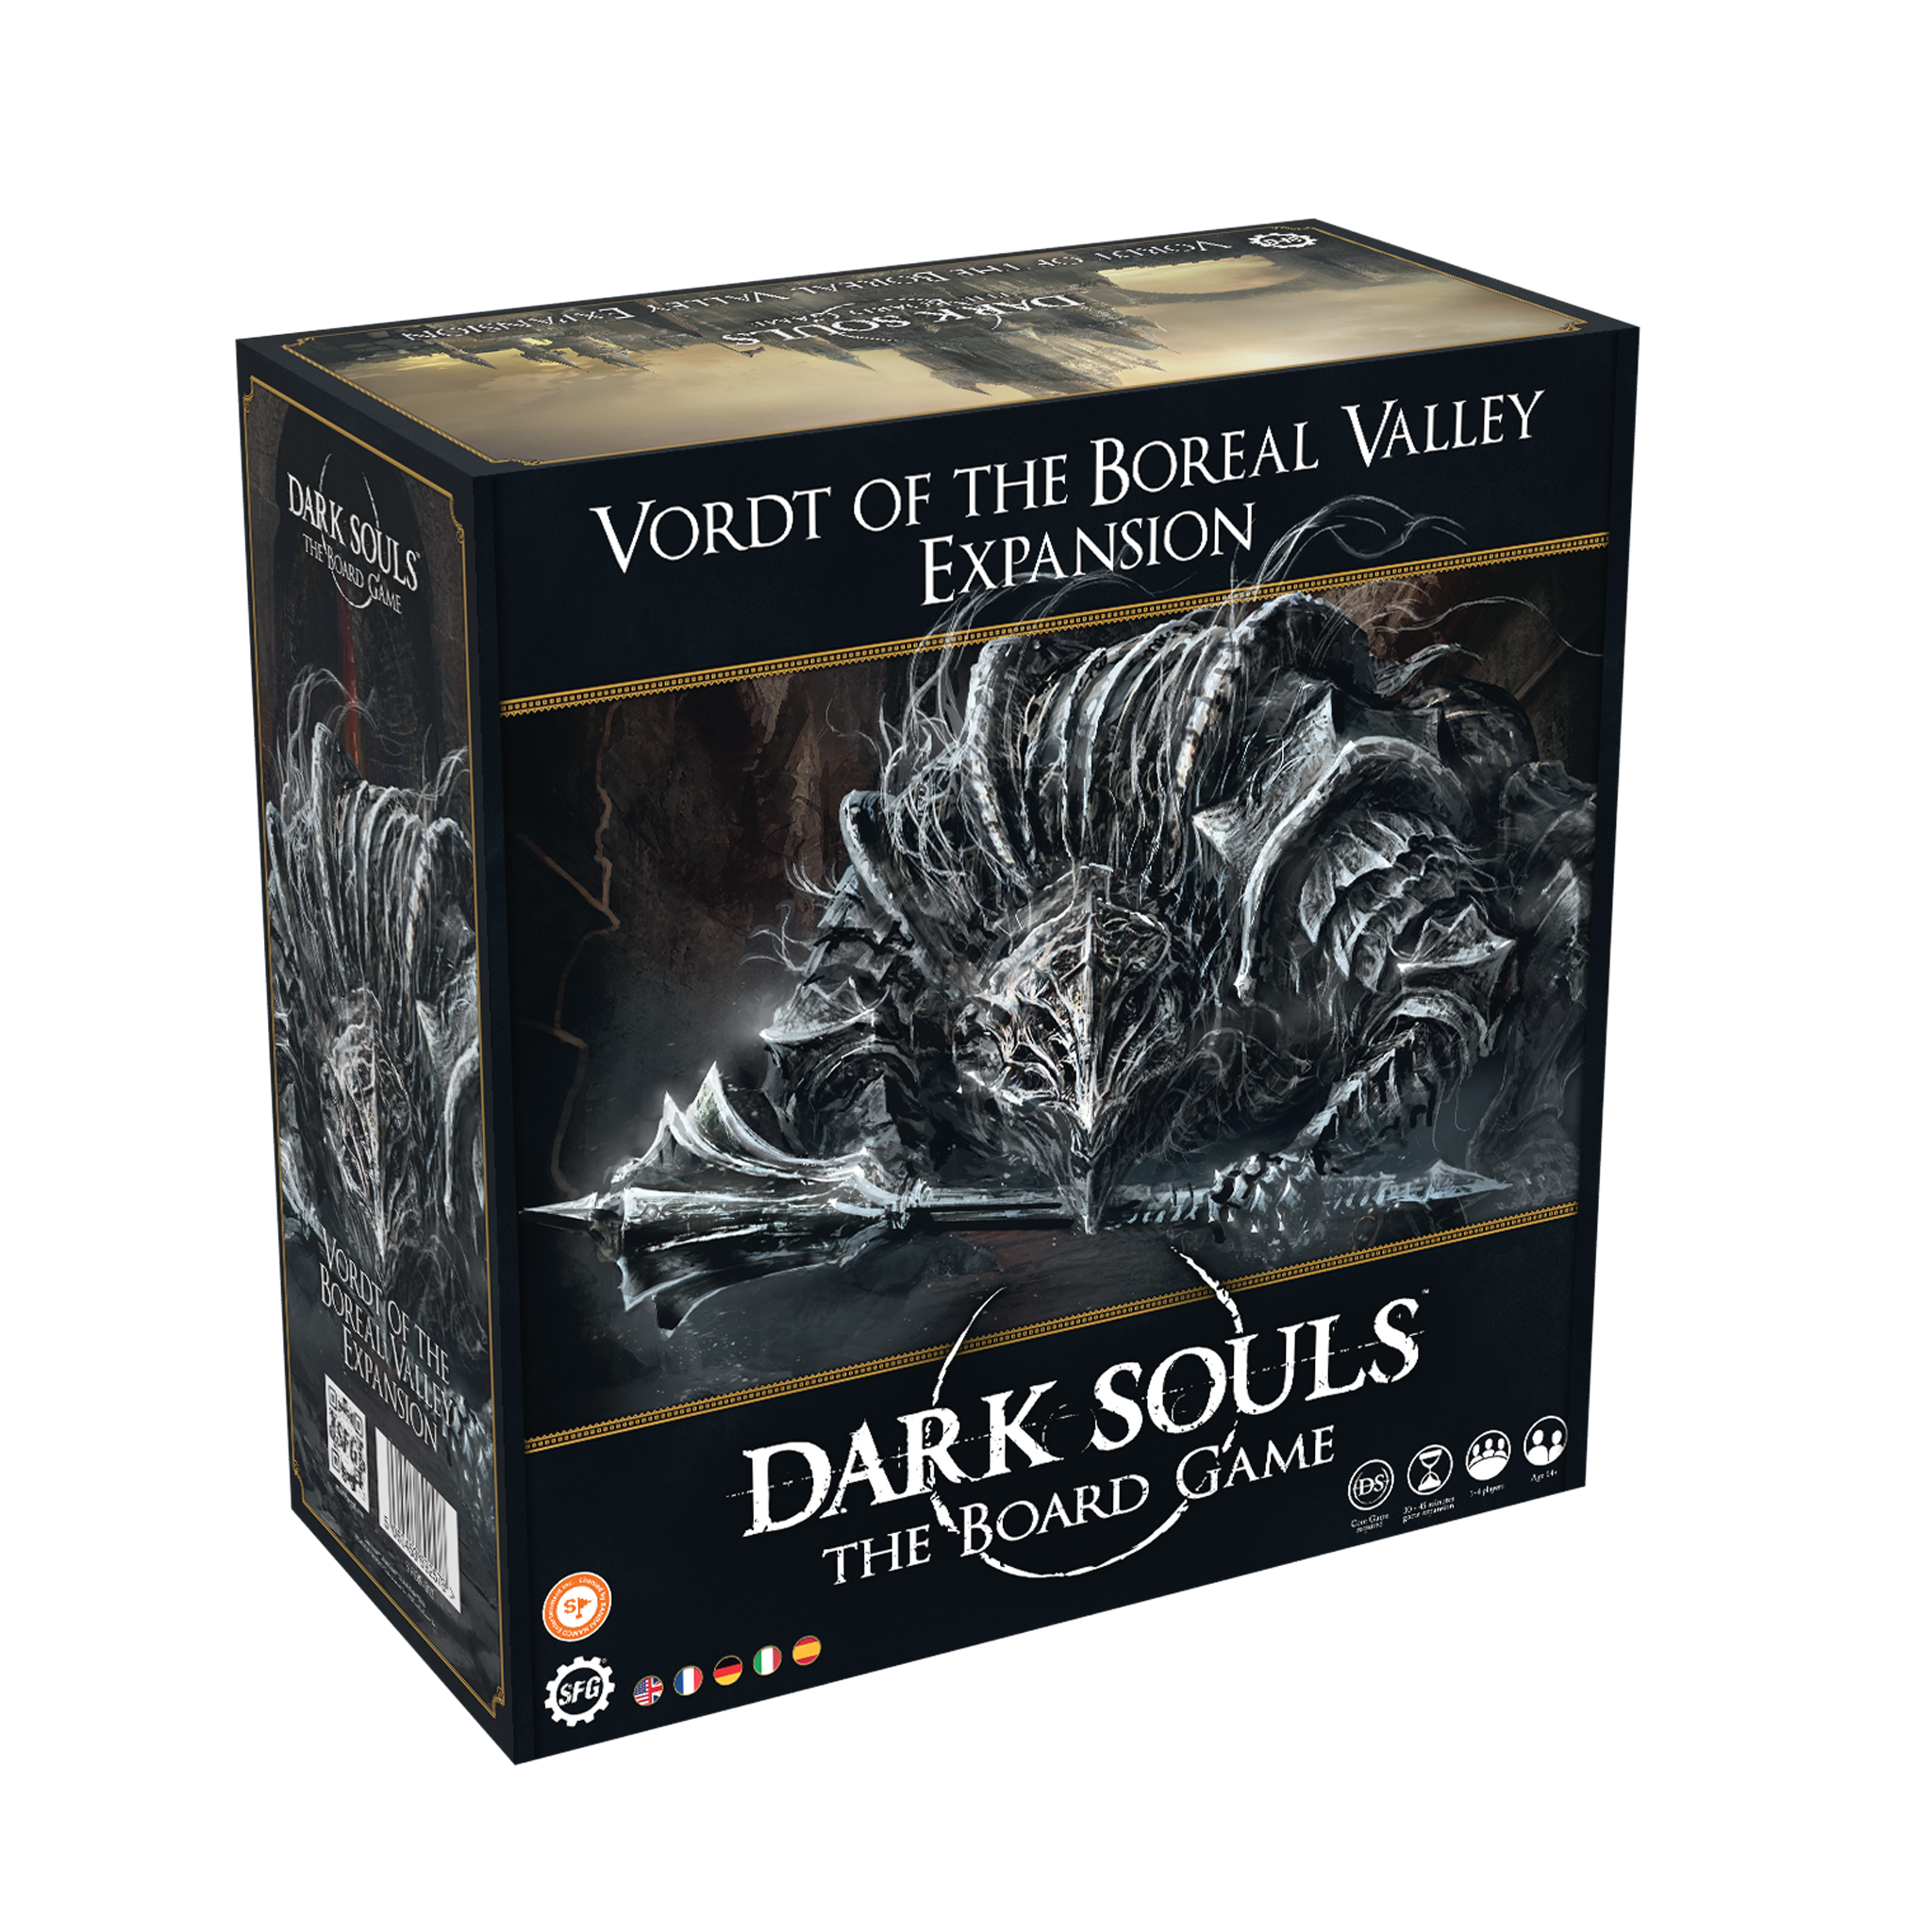 Dark Souls: Board Game - Vordt of the Boreal Valley Expansion